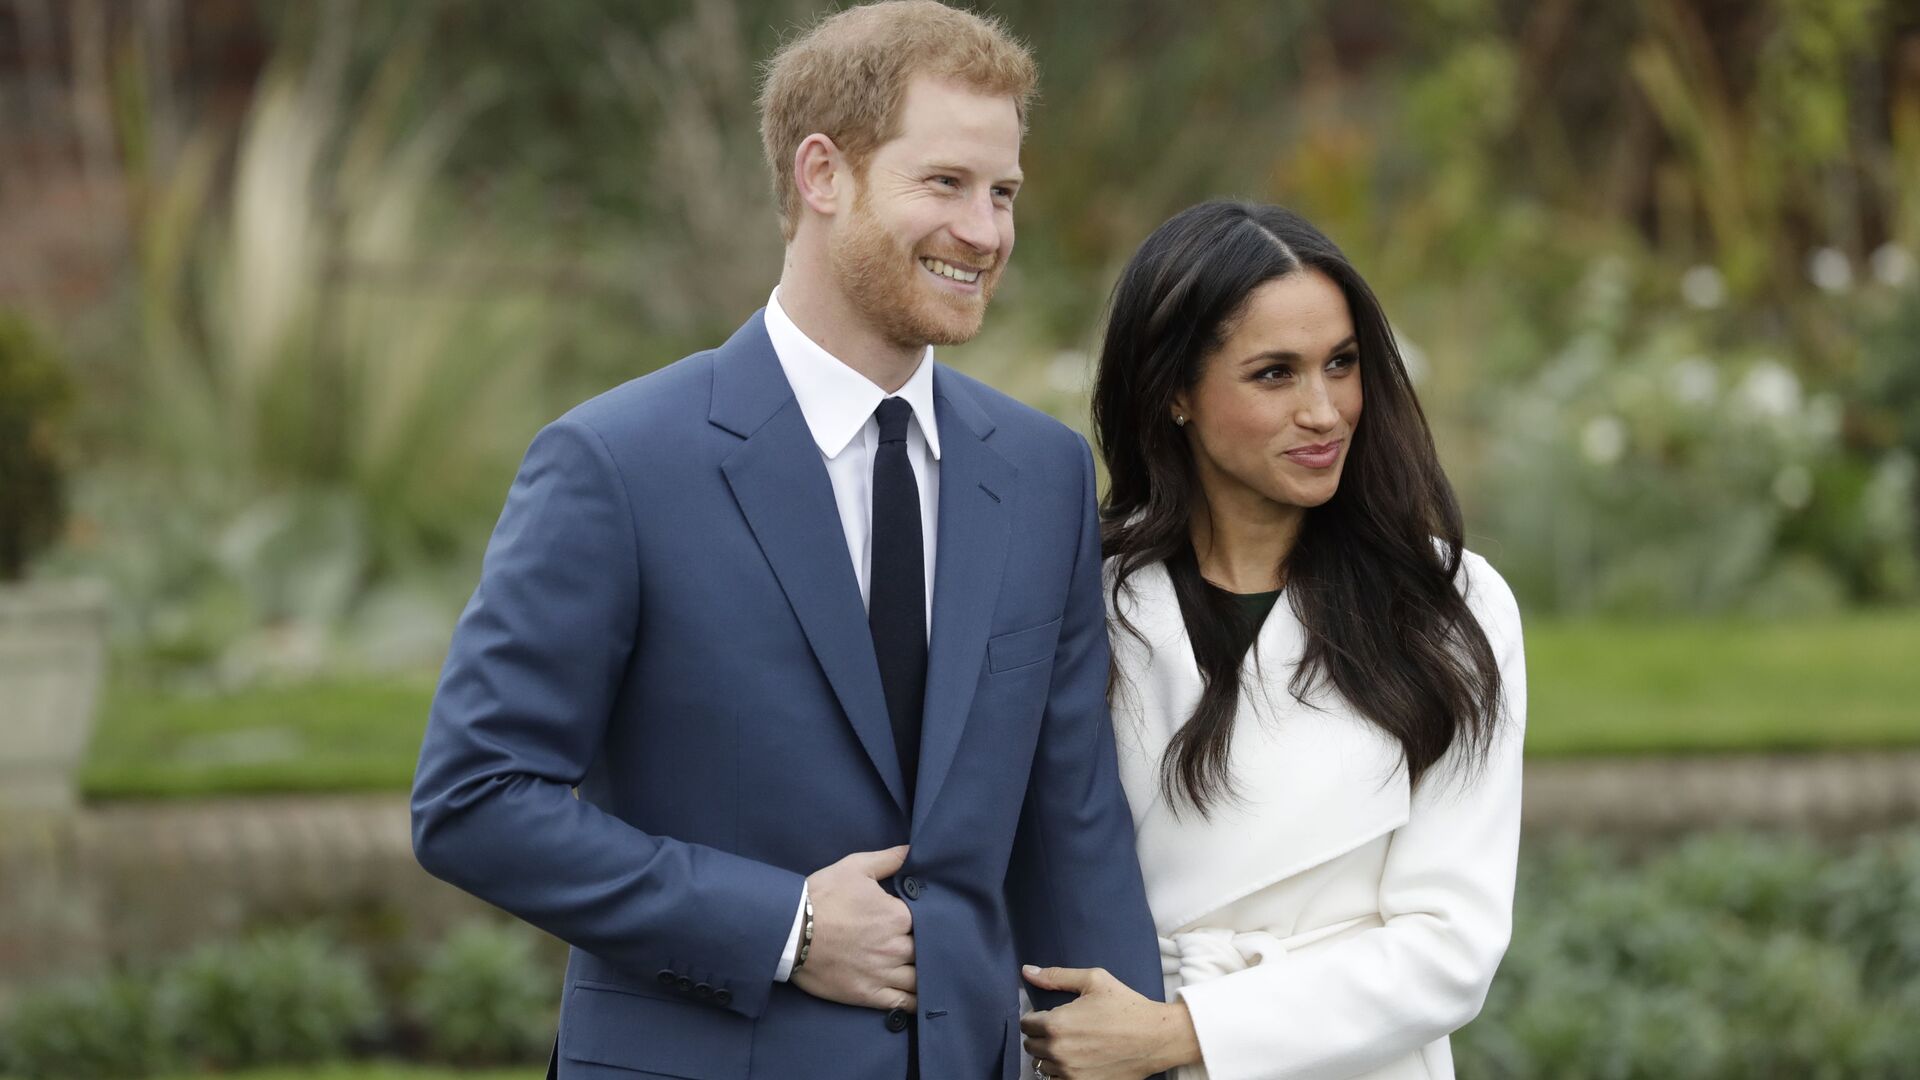 Britain's Prince Harry and his fiancee Meghan Markle pose for photographers during a photocall in the grounds of Kensington Palace in London, Monday Nov. 27, 2017 - Sputnik International, 1920, 07.02.2022